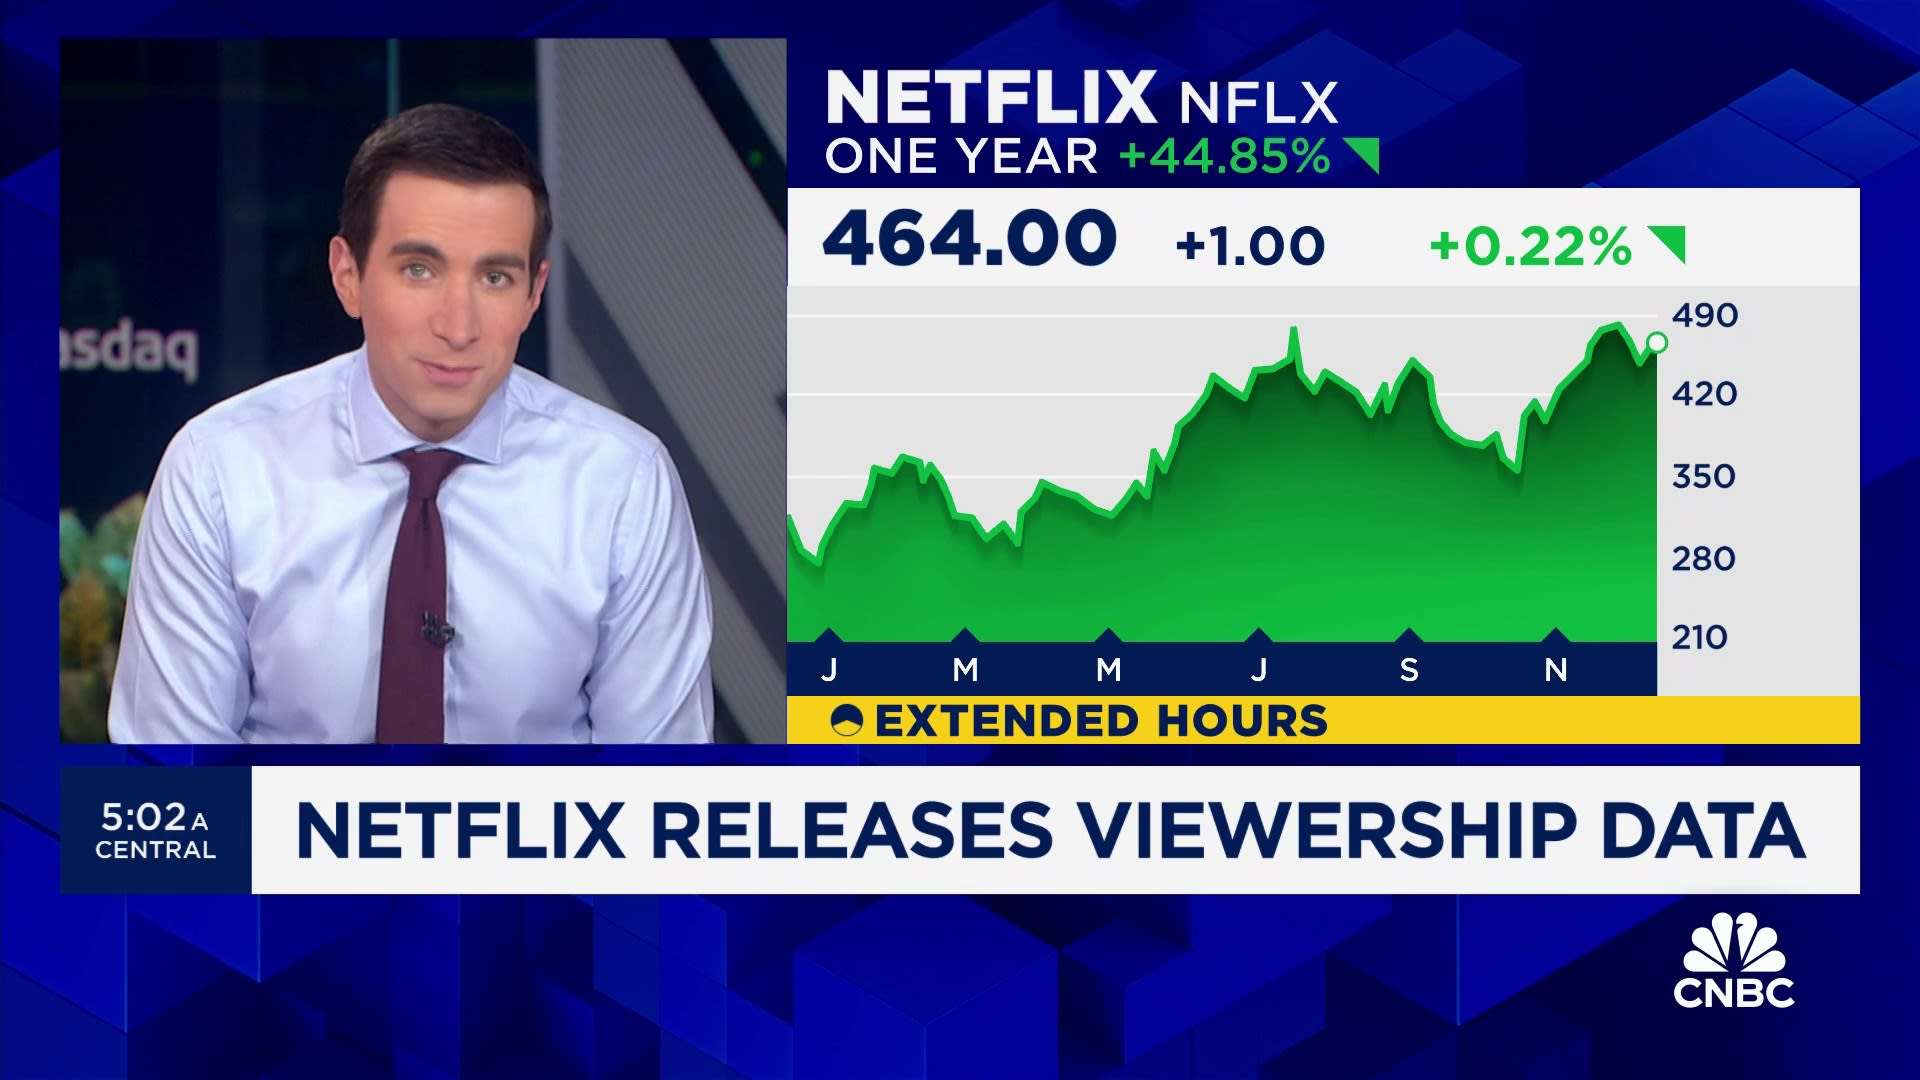 Netflix releases viewership data for nearly all titles